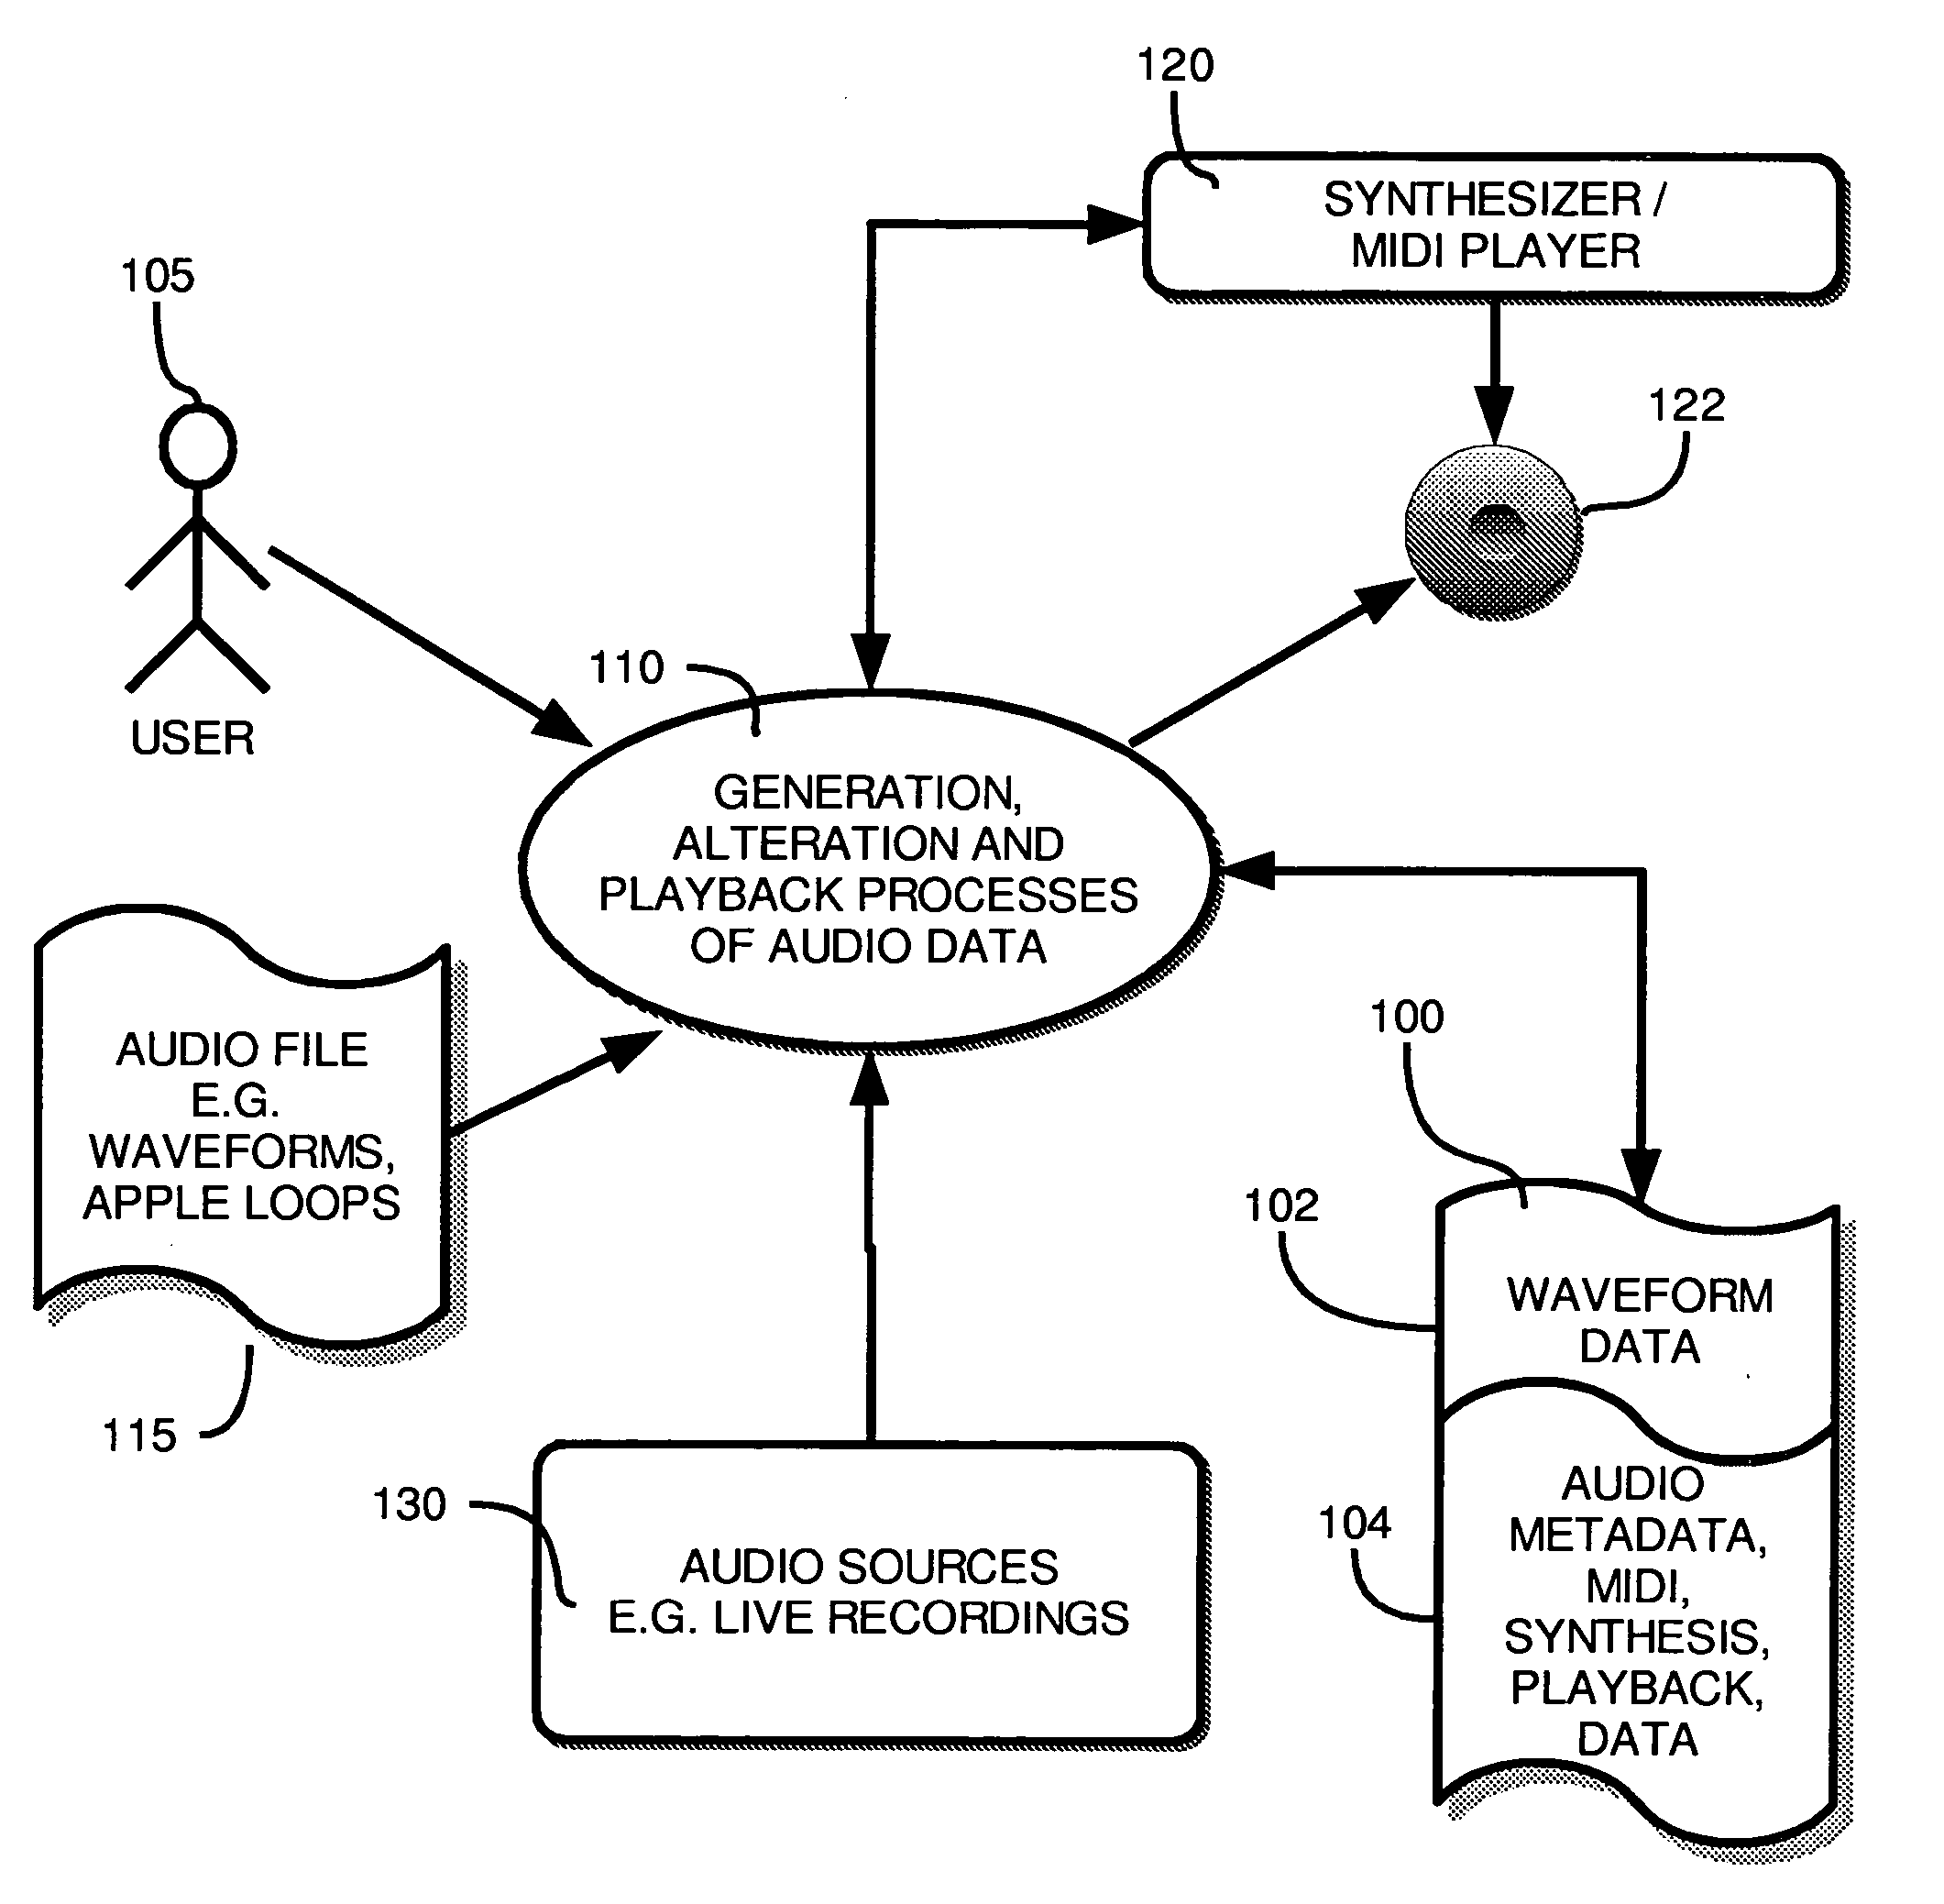 Method and apparatus for enabling advanced manipulation of audio